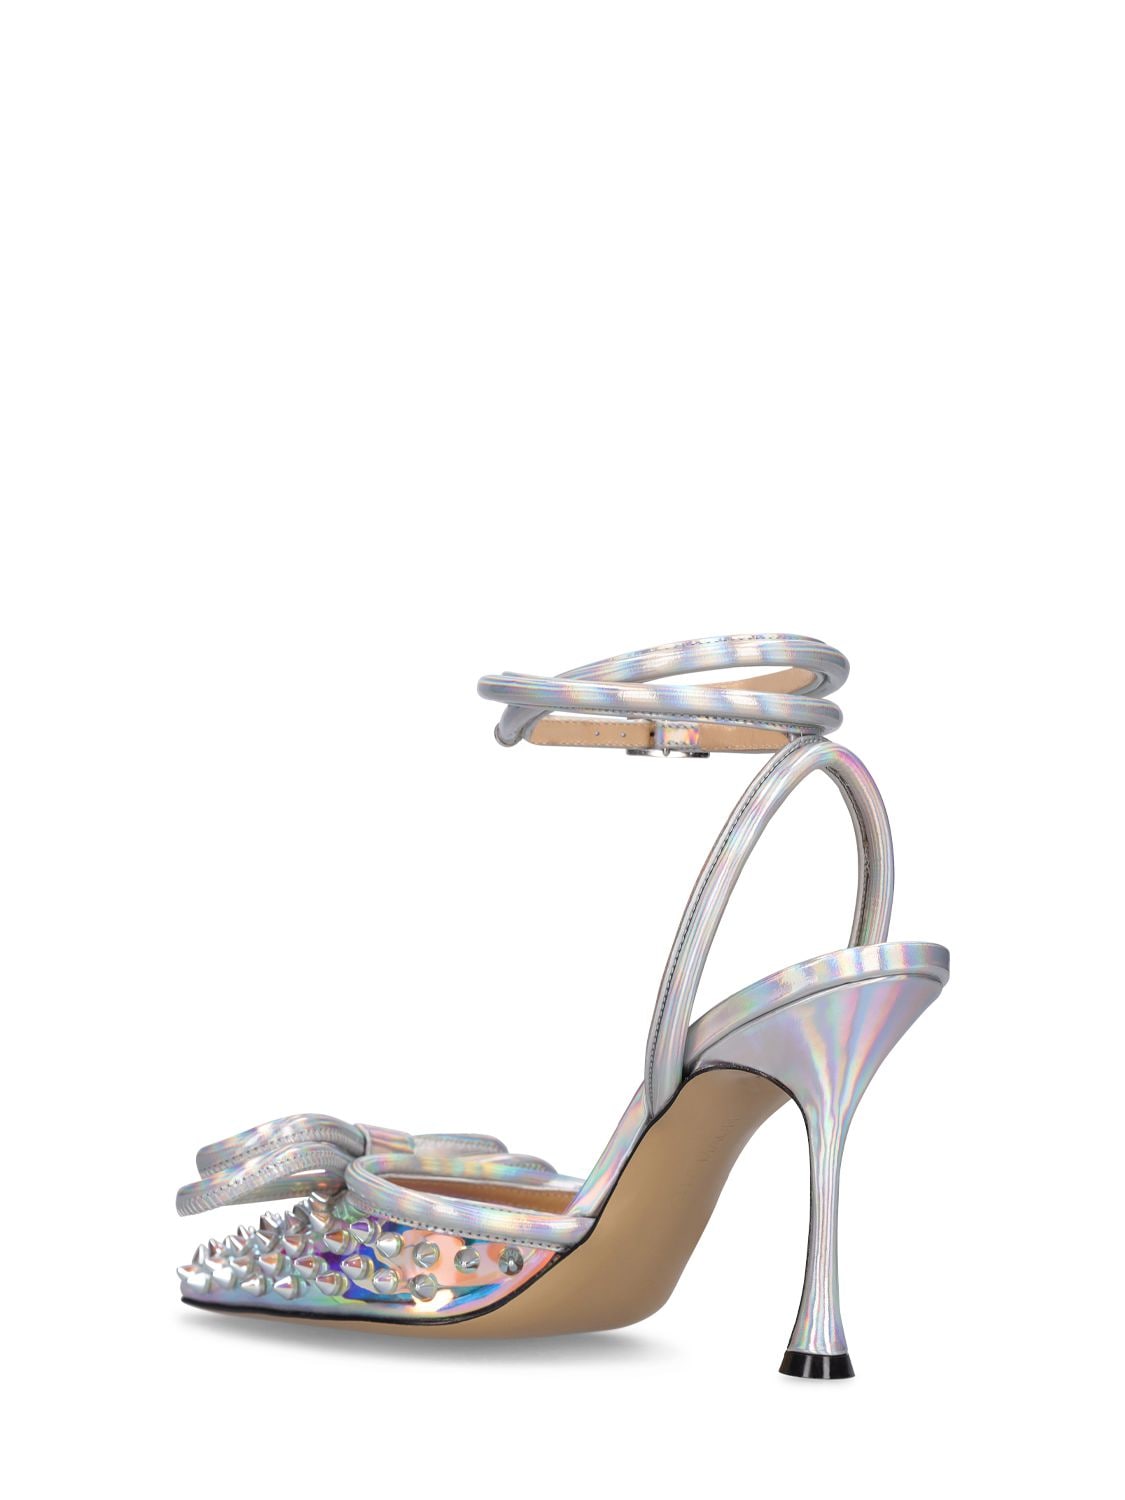 Shop Mach & Mach 100mm Double Bow Pvc & Leather Sandals In Iridescent